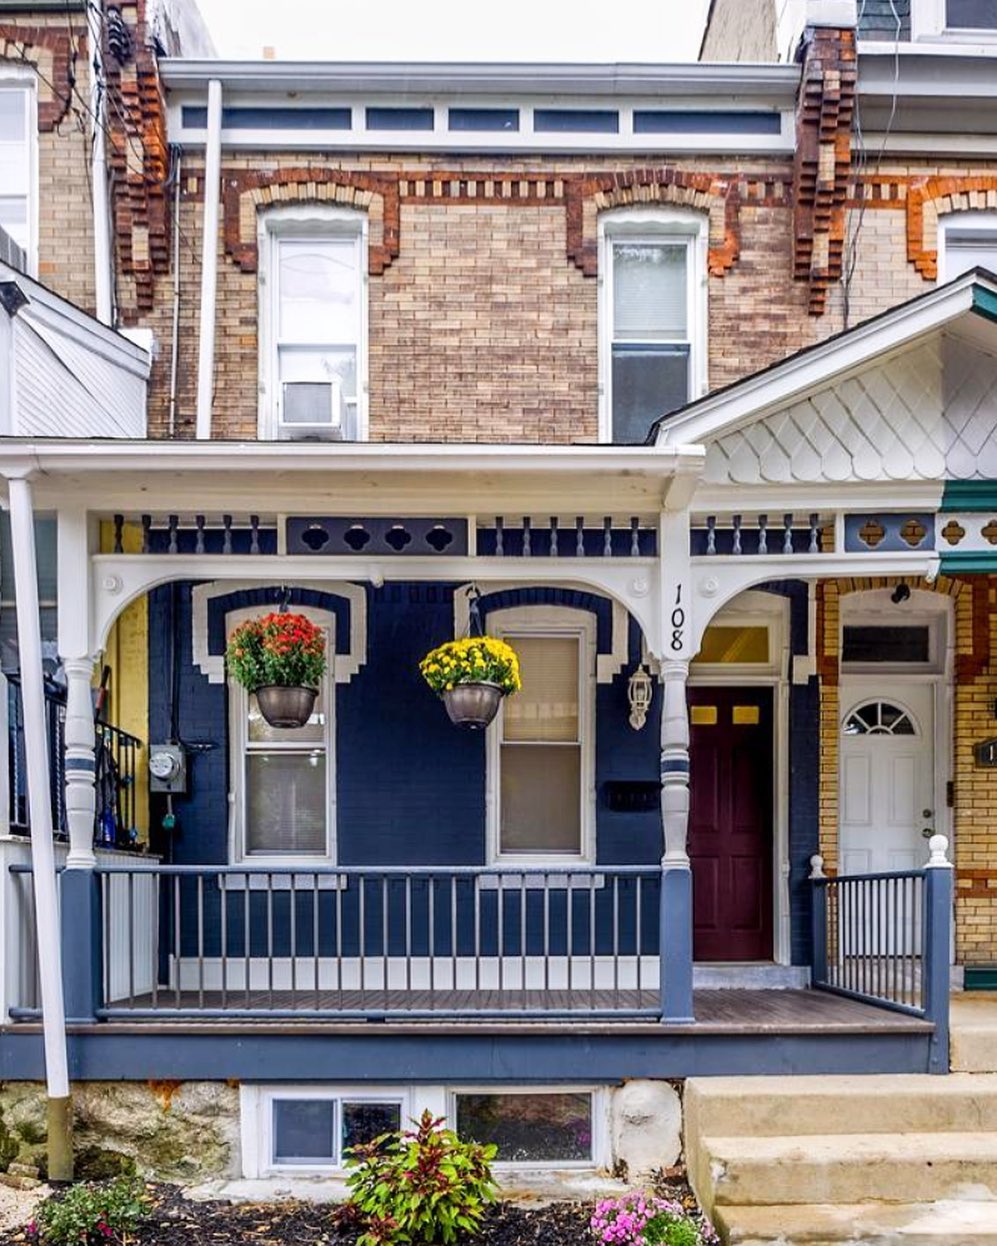 Navy and white house in Manayunk, Philadelphia. Photo by Instagram user @keepitrealestatephilly